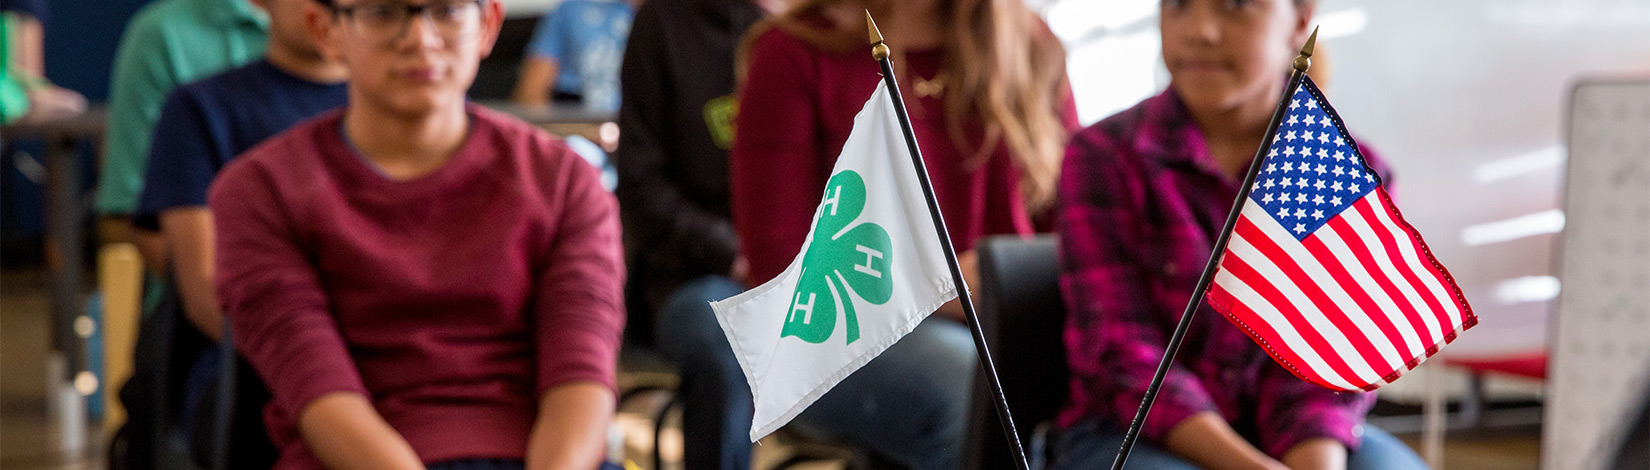 4-H flag and United States flag on desk with gavel in courtroom, 4H youth seated in background